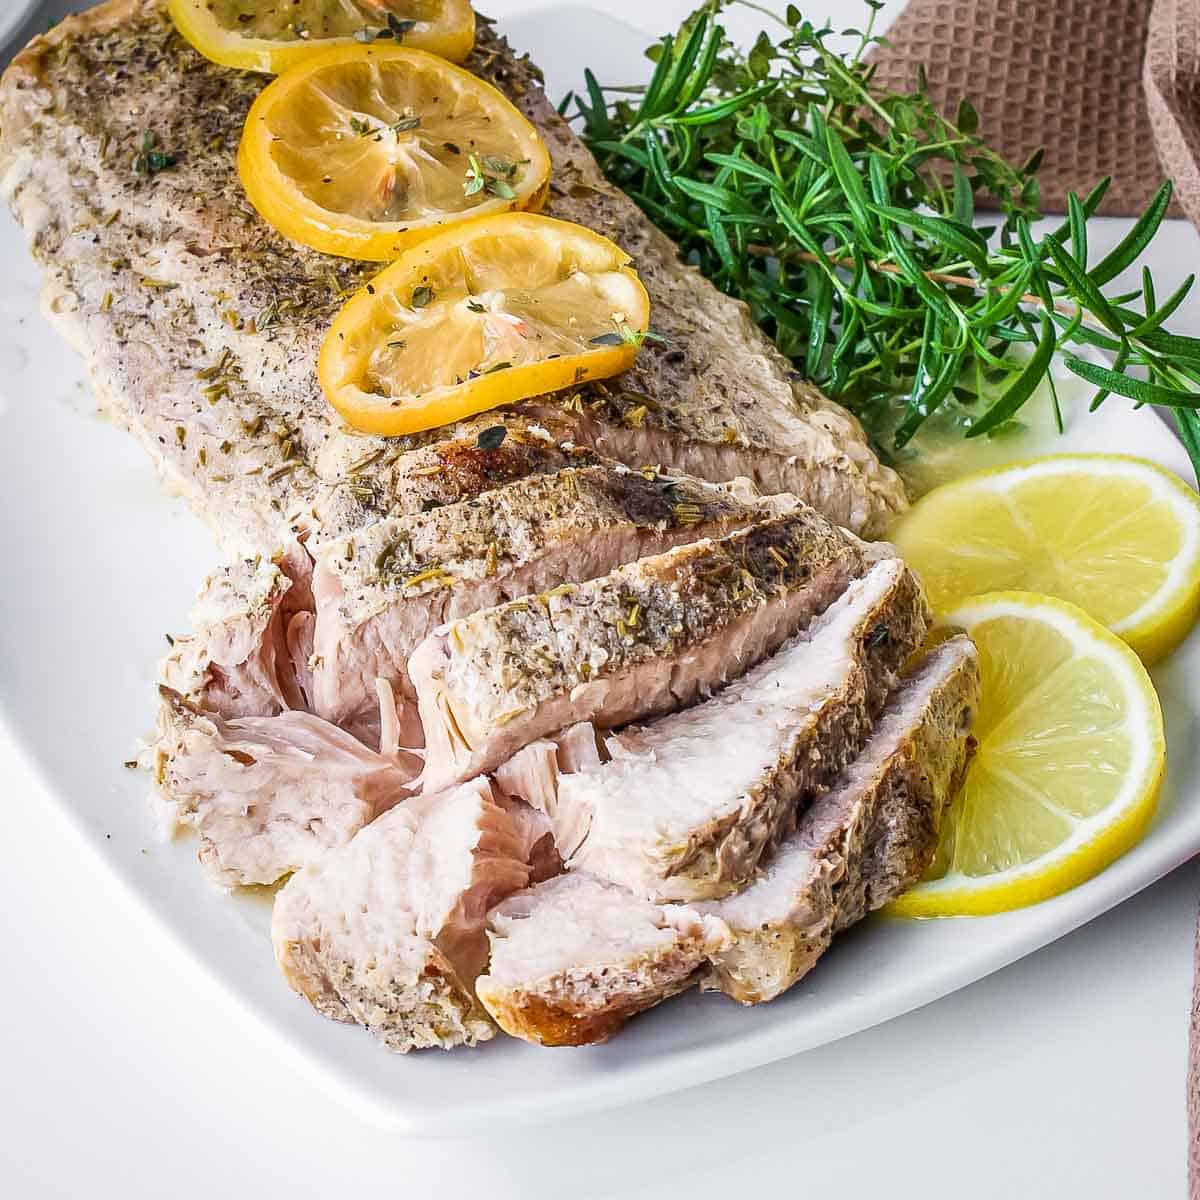 Side shot of a whole pork roast with slices on the side garnished with lemon slices and thyme on a white rectangle plate.